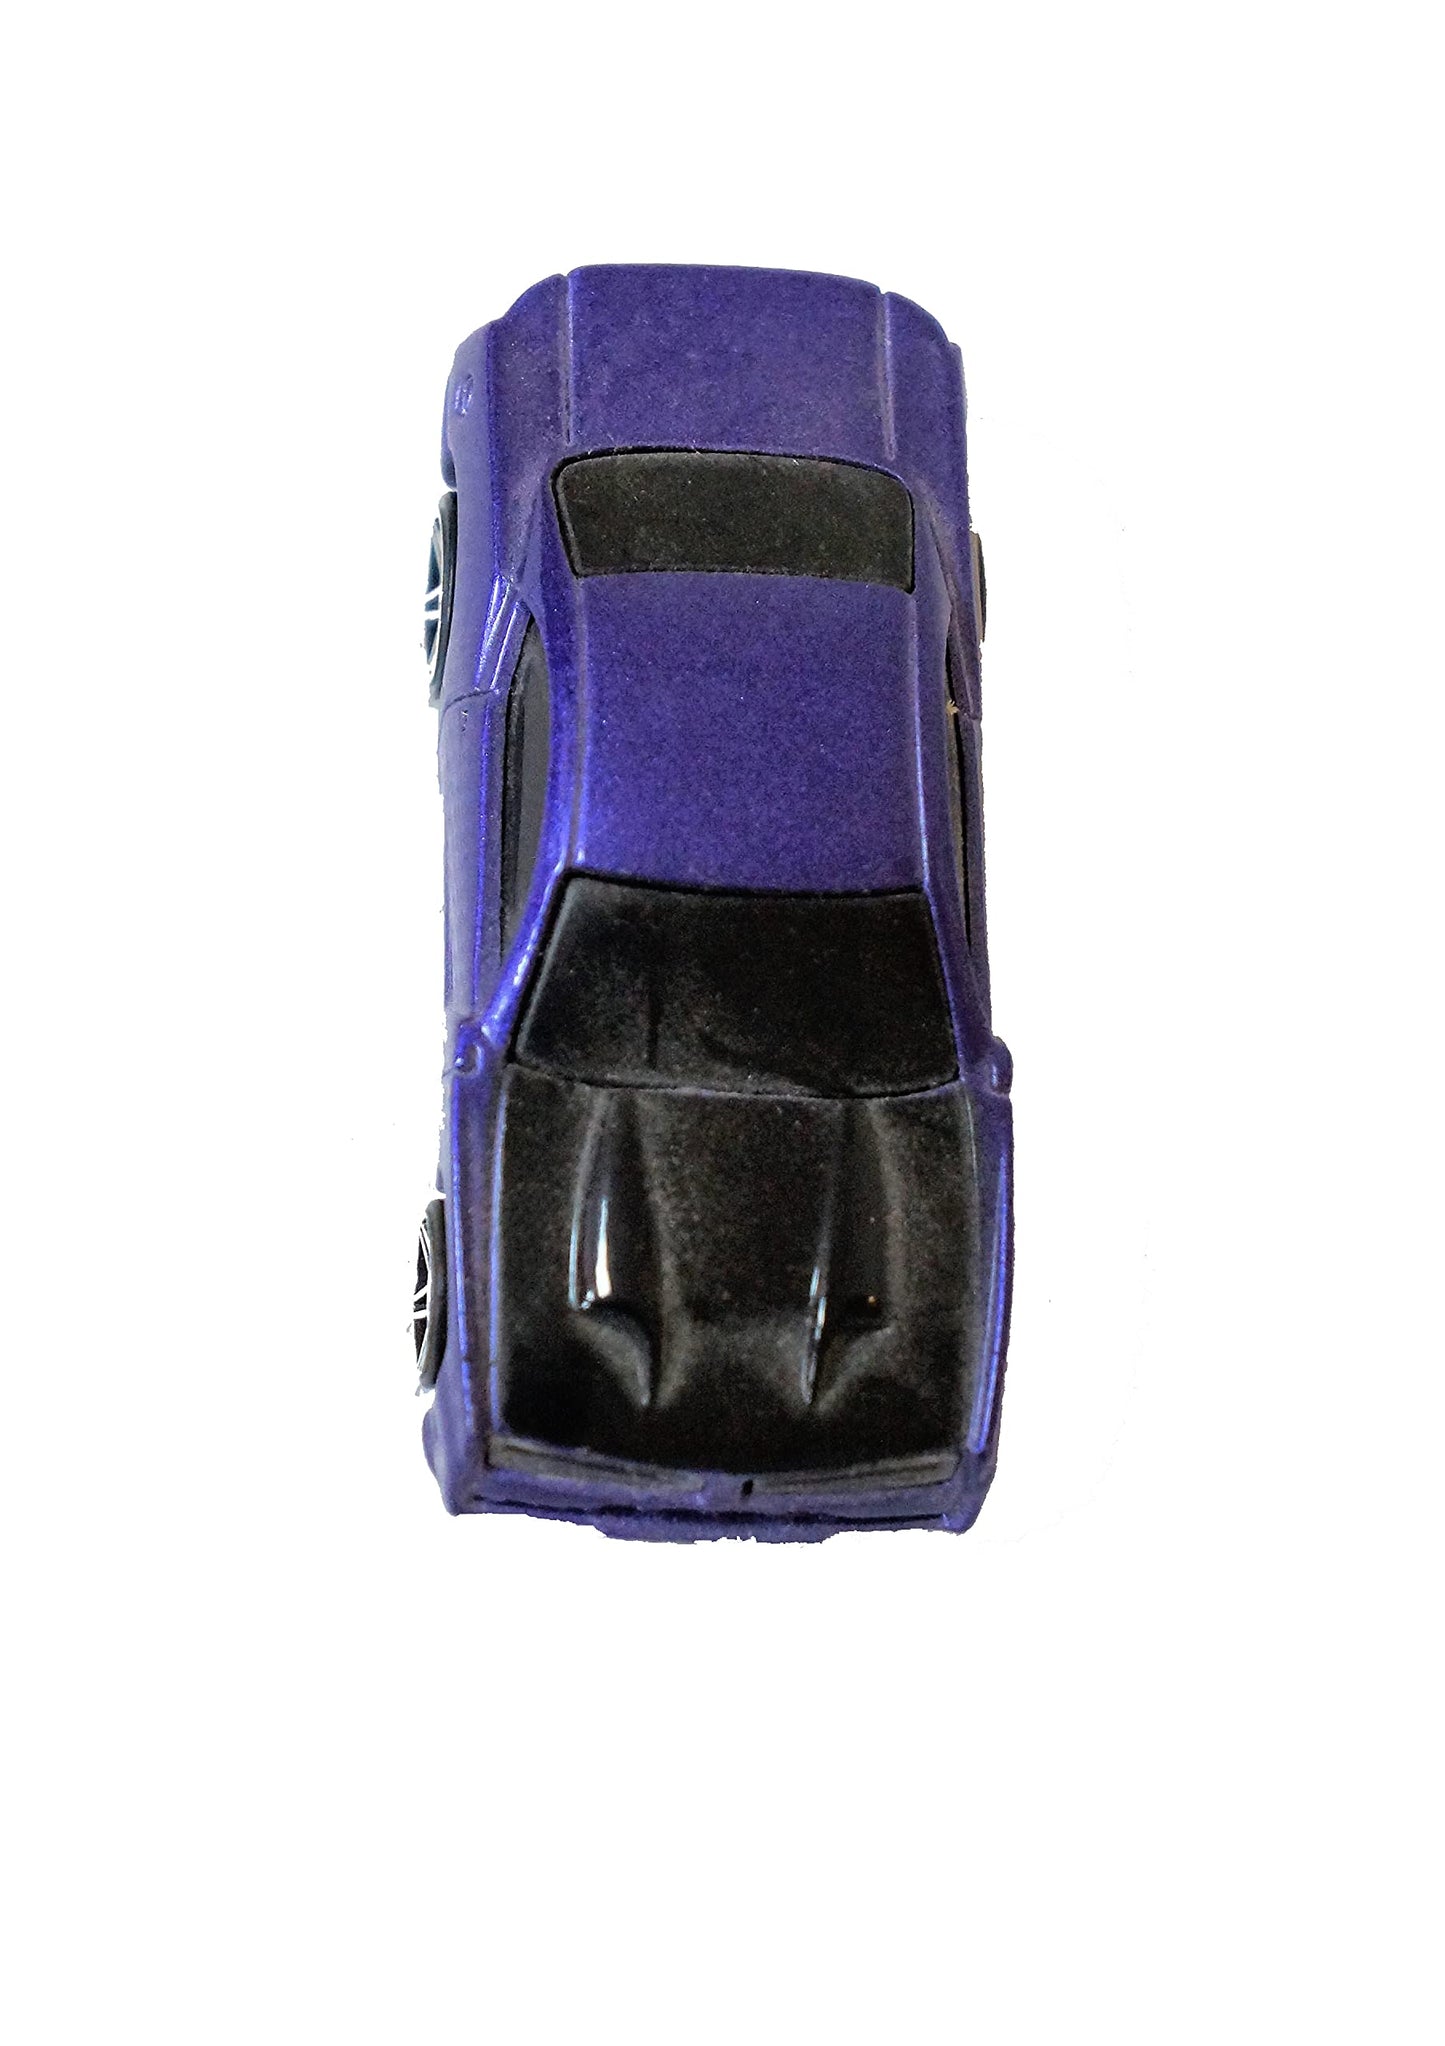 Vintage 2004 Hot Wheels Die-Cast Model Purple Toy Car With Working Lights- Fantastic Condition